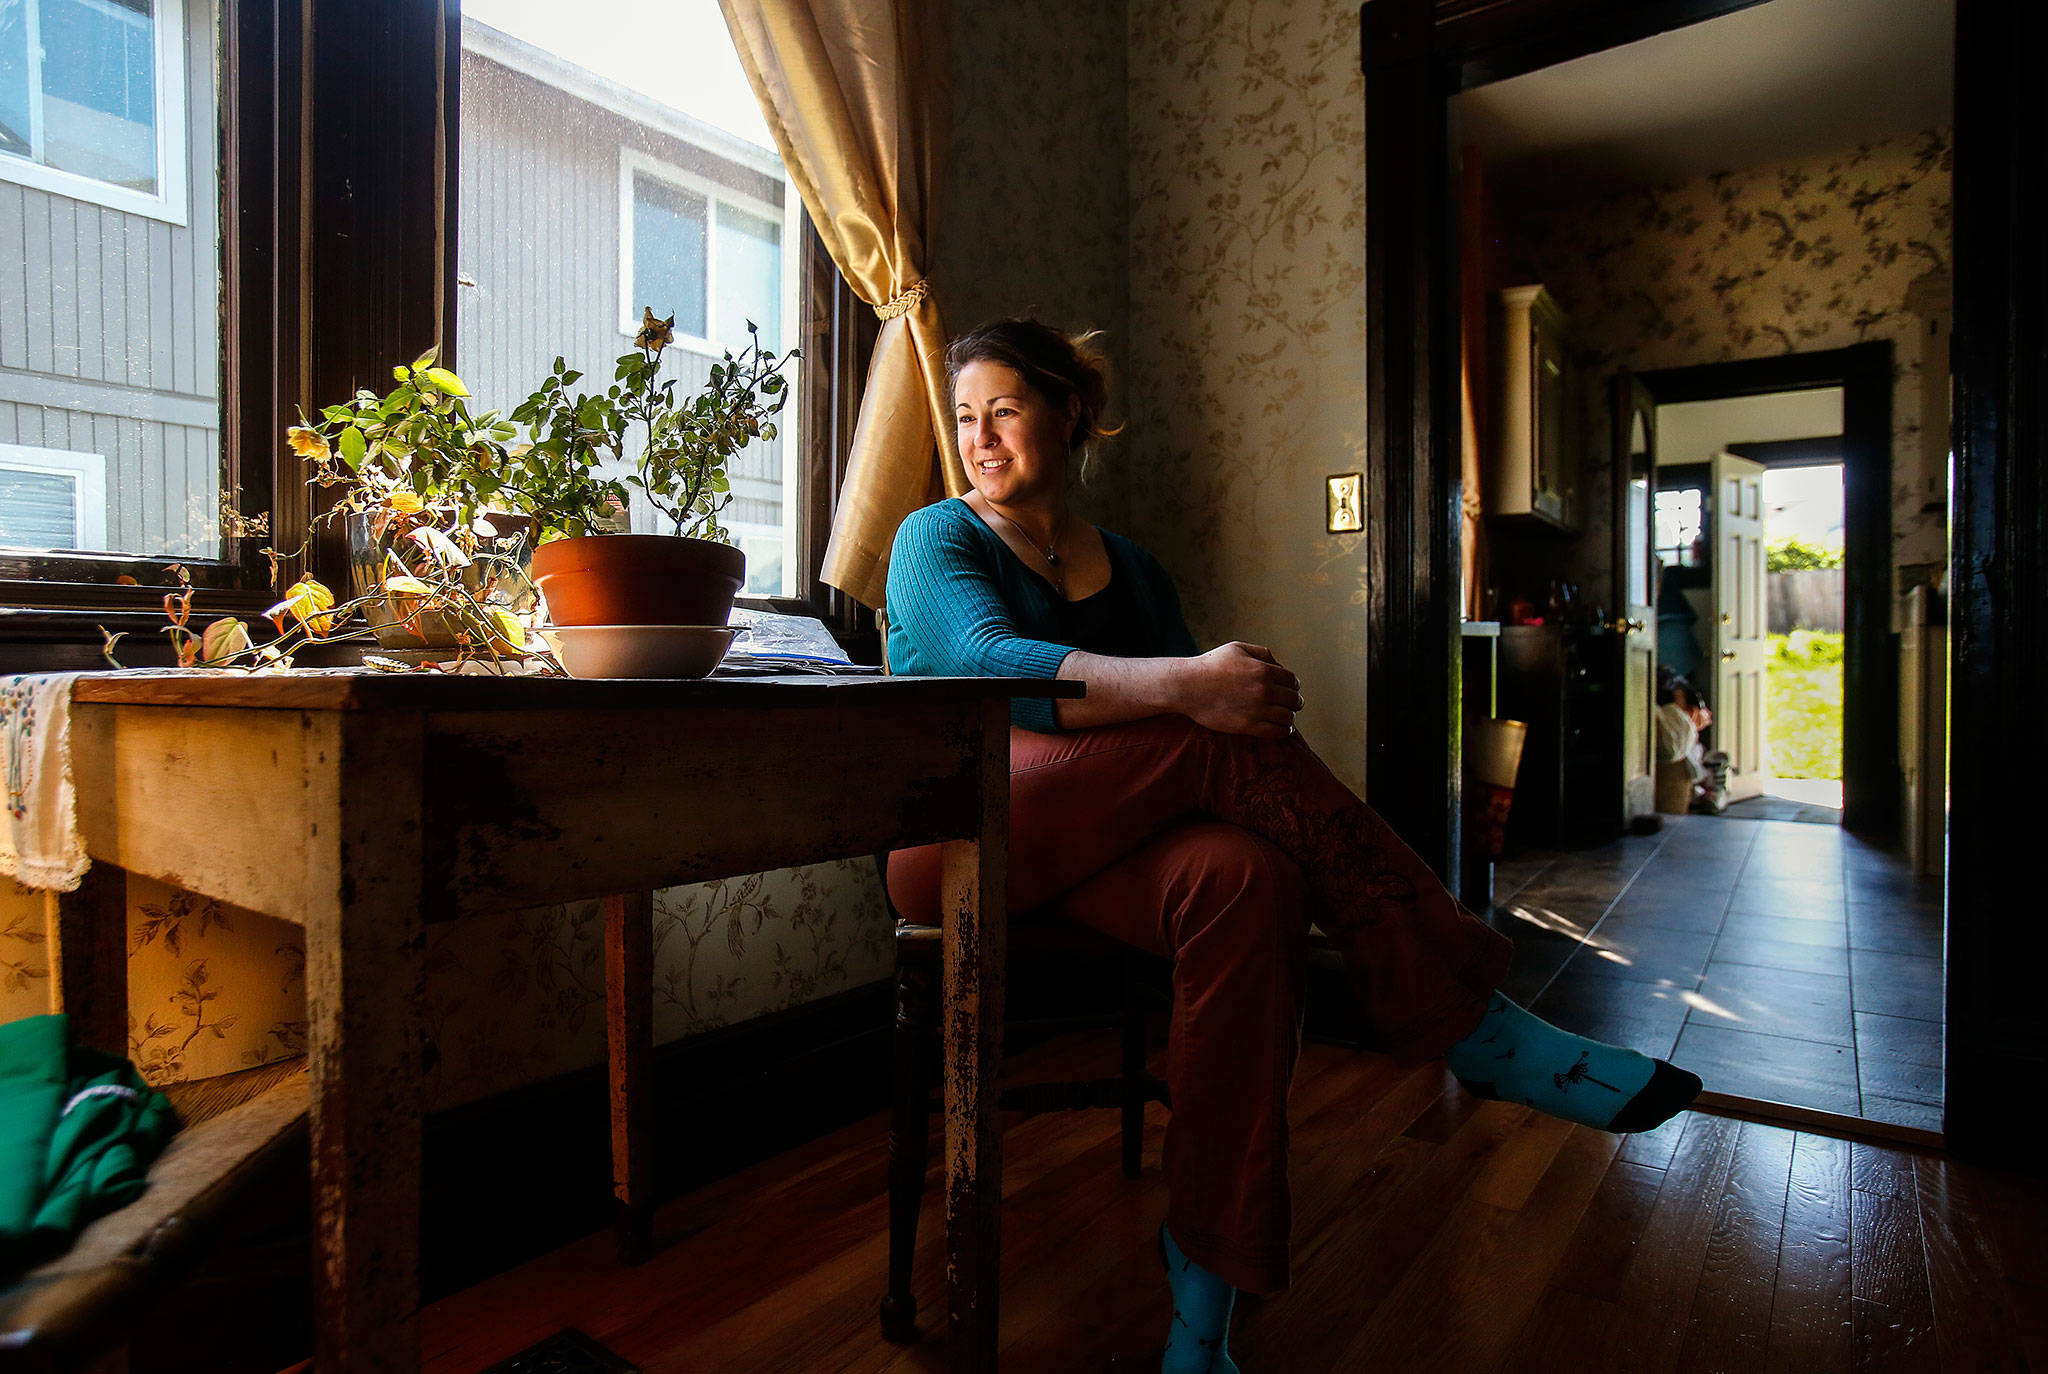 Andee Vaughan, 36, who loves old houses and rents this one, enjoys the play of sunlight Monday in the Swalwell Cottage. Said to be Everett’s oldest standing house, it was completed in 1892, a year before the city was incorporated. (Dan Bates / The Herald)